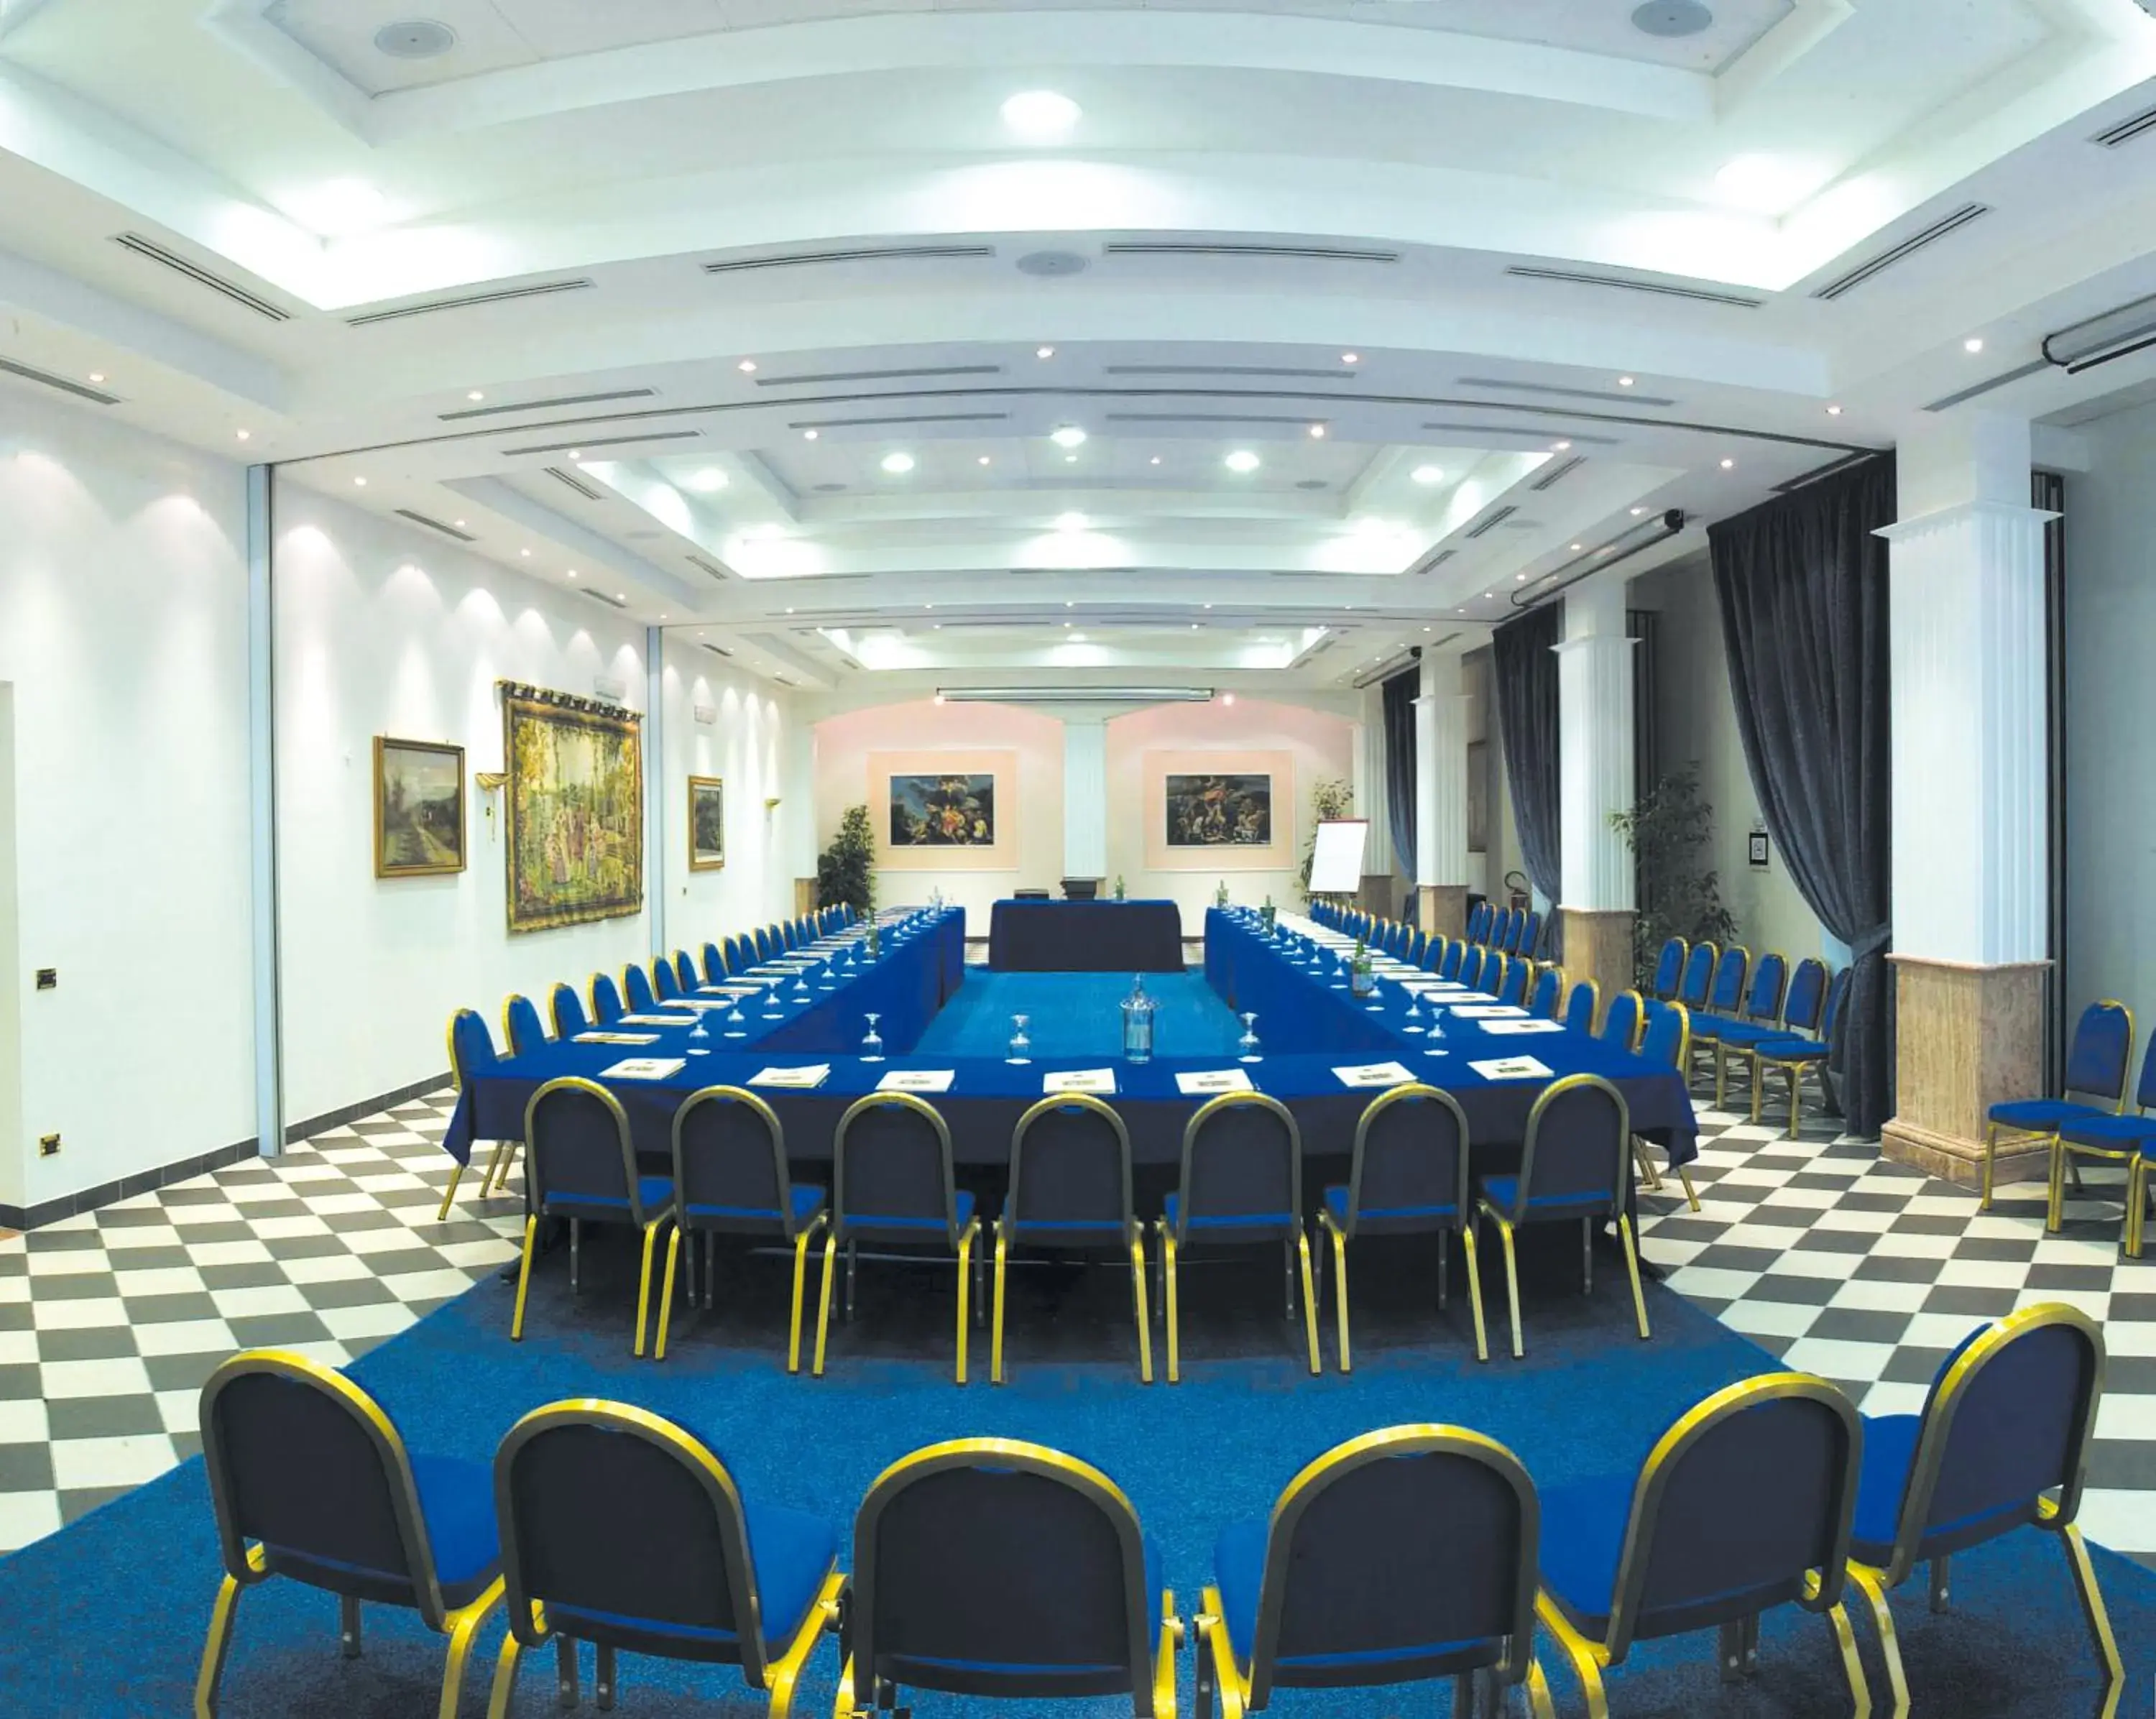 Meeting/conference room in Hotel Principe